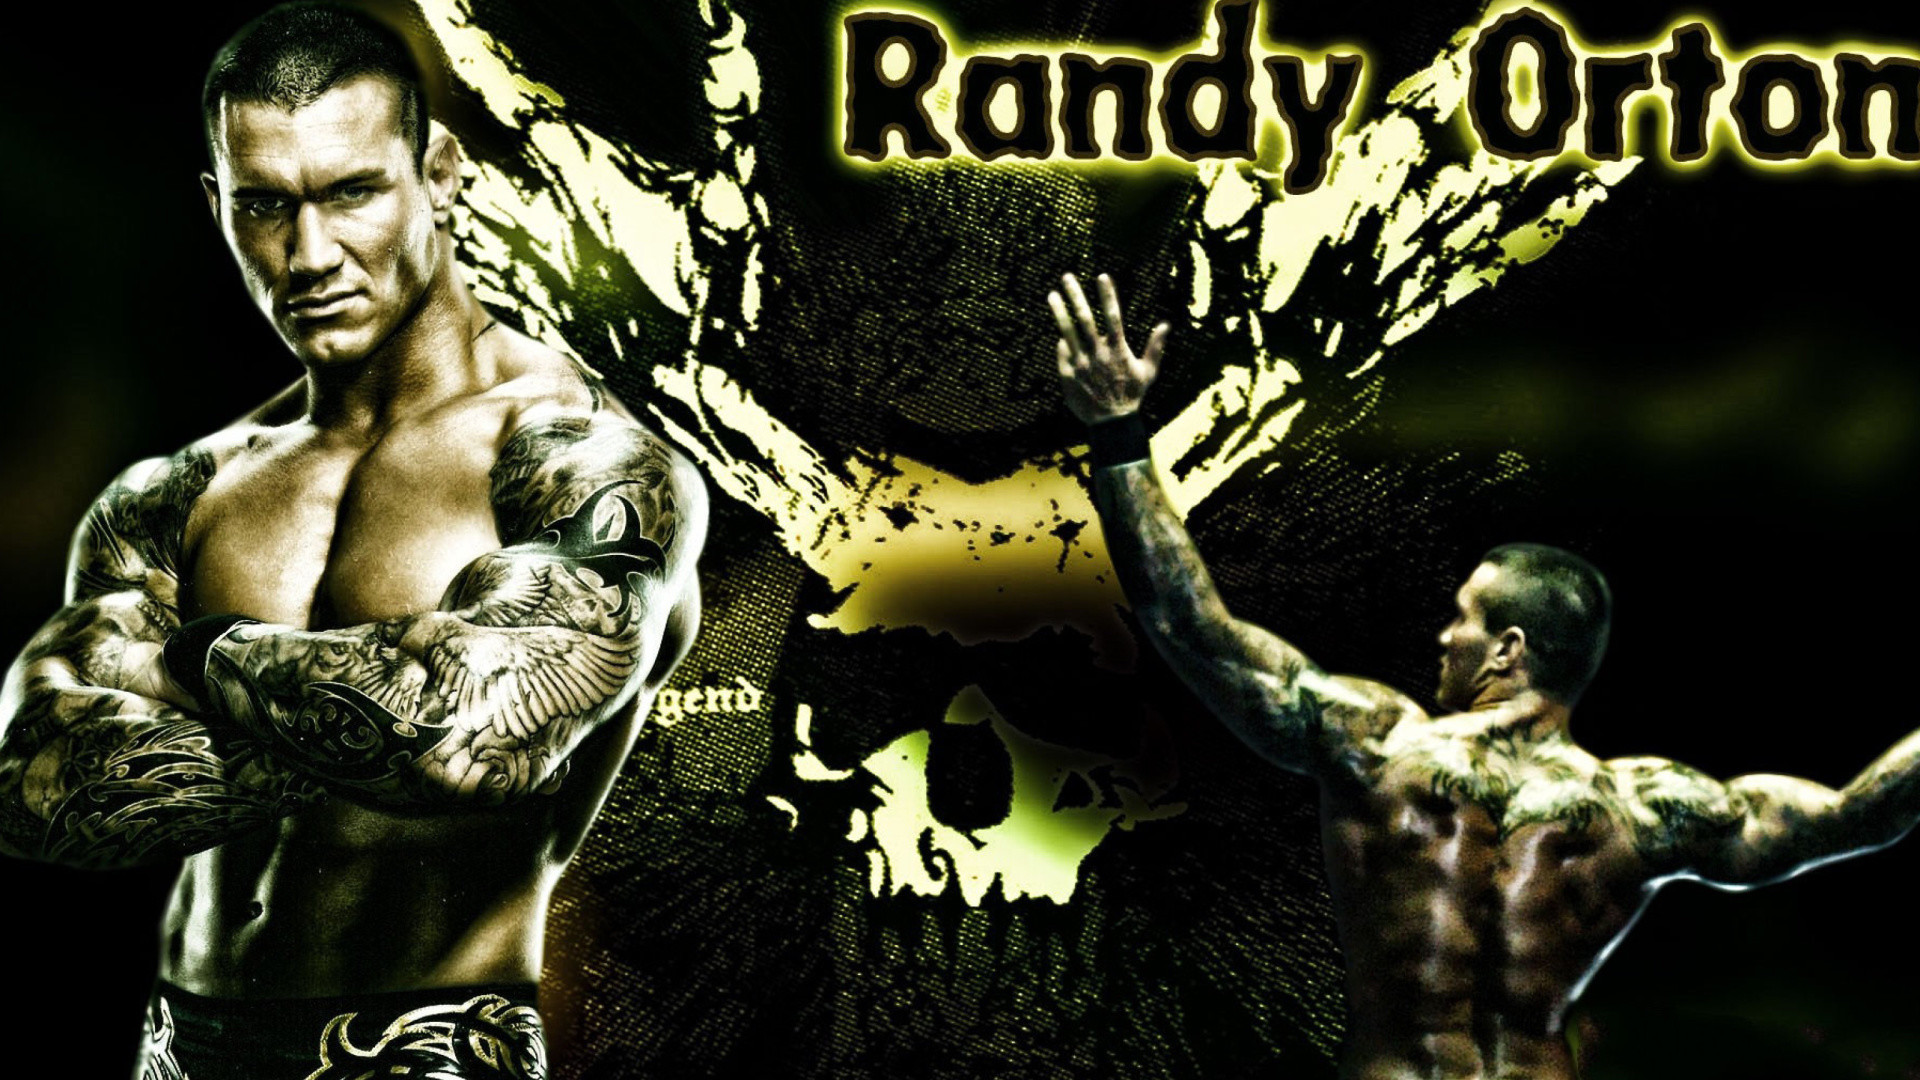 1920x1080 Randy Orton Wallpapers Images Photos Pictures Backgrounds